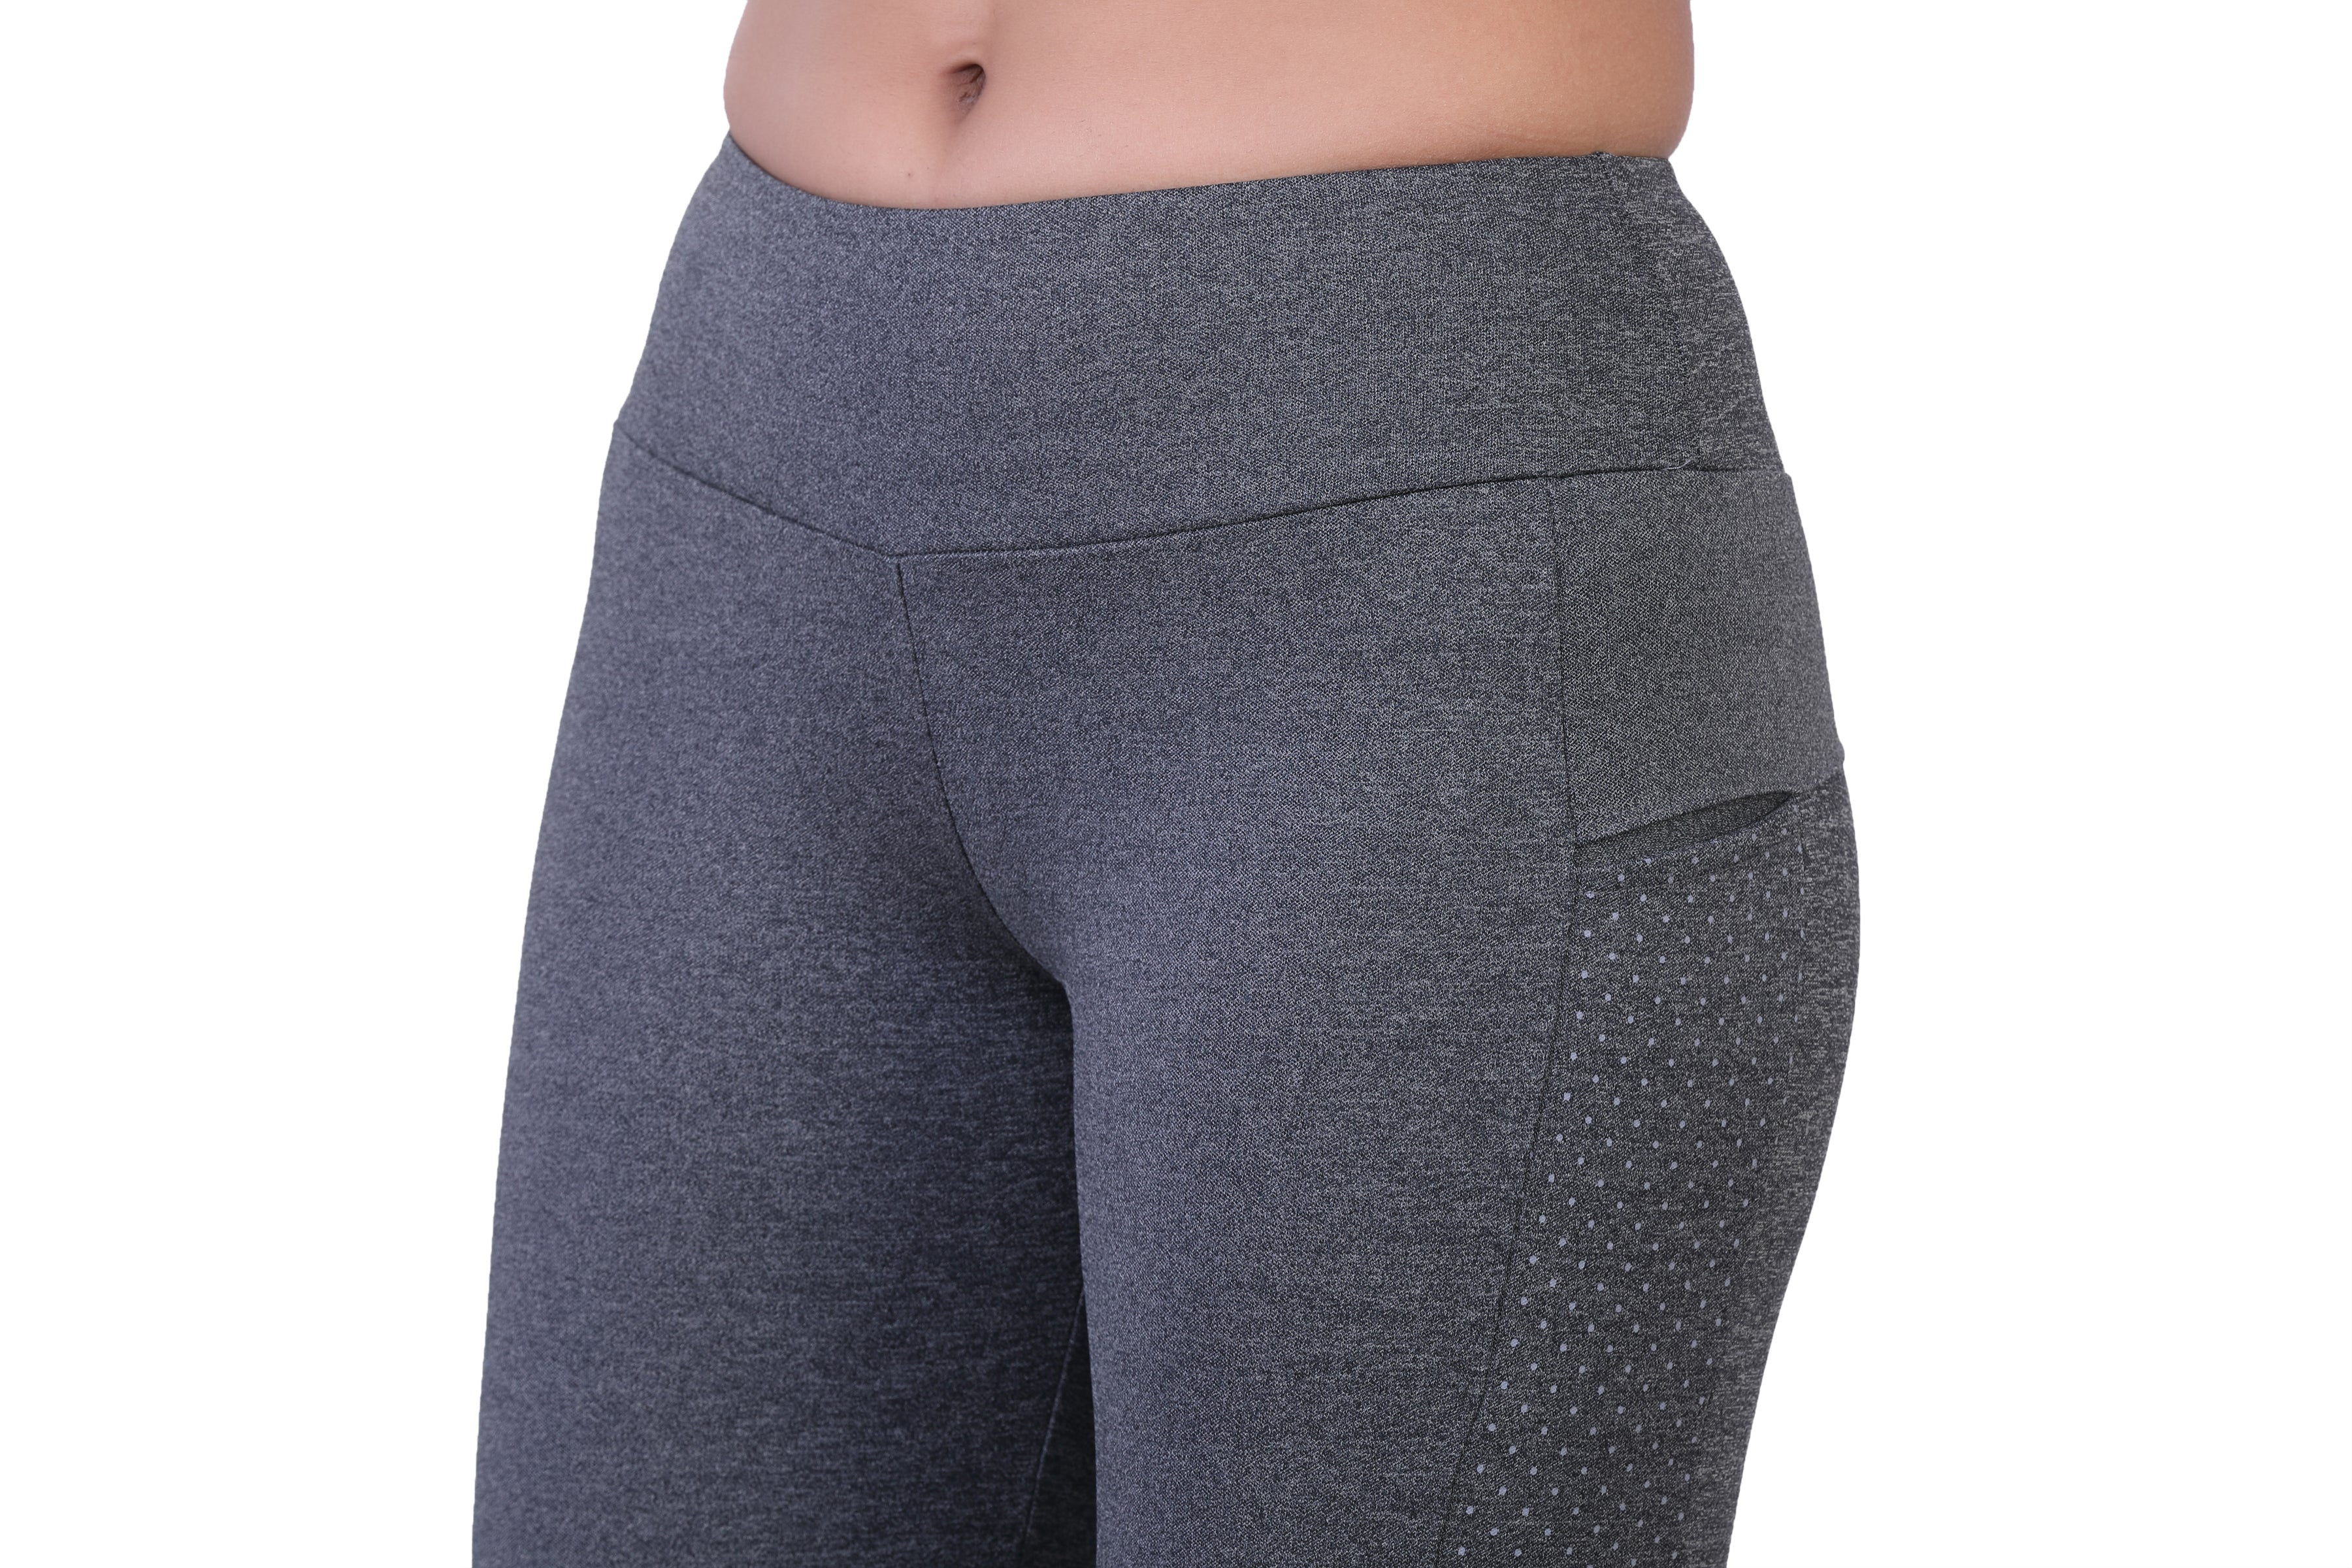 Dragonate Tights for Women Workout | Gym Wear Leggings for Girls | High  Waist Pants with Zip Pocket for Women in Back & Light Grey Color - S Size :  Amazon.in: Fashion